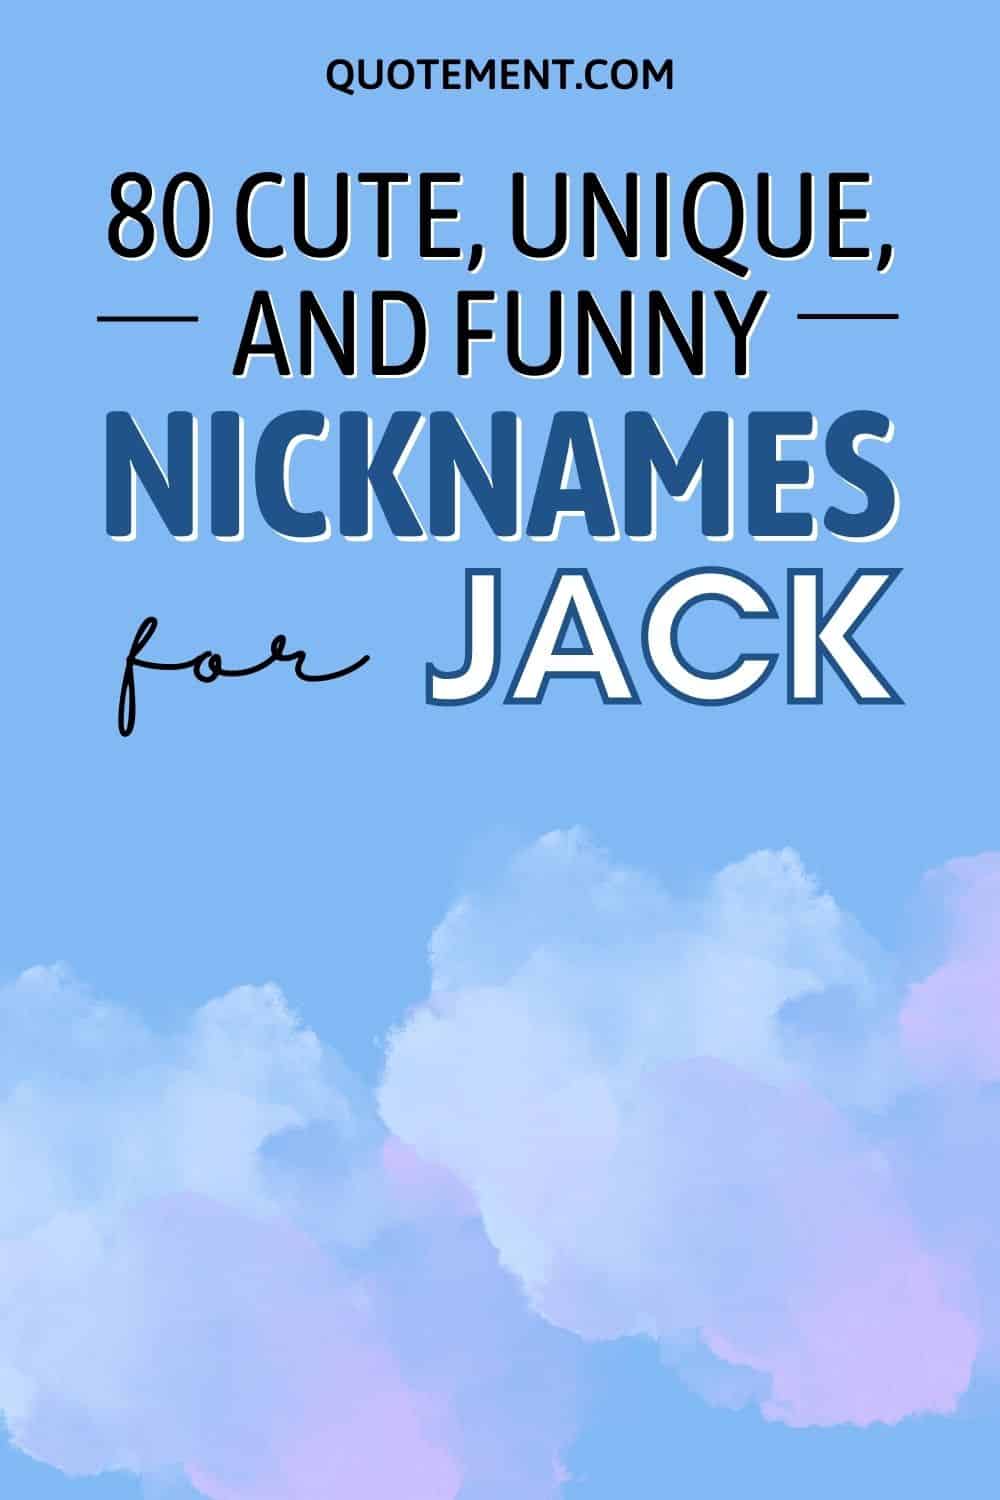 80 Cute, Unique, And Funny Nicknames For Jack